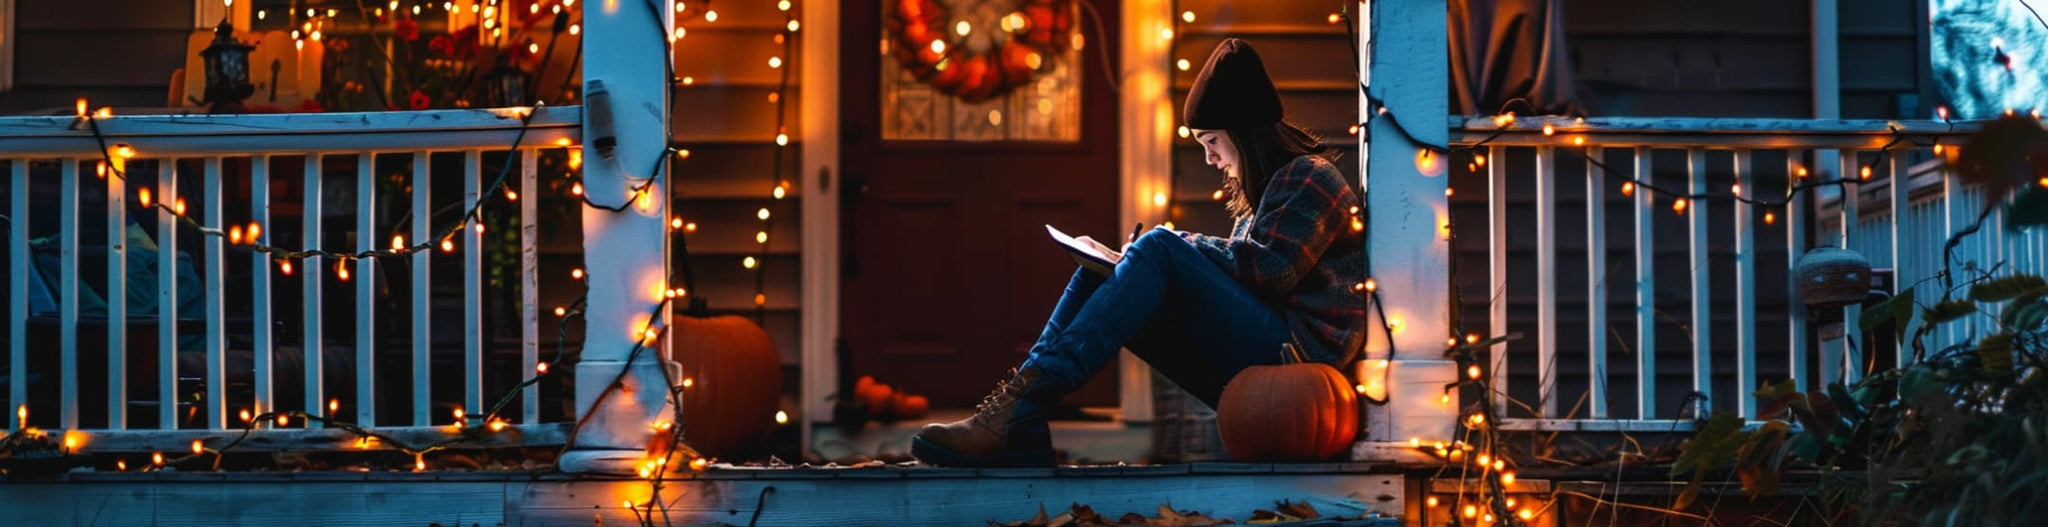 Sitting on a porch decorated with Halloween lights, writing in a journal